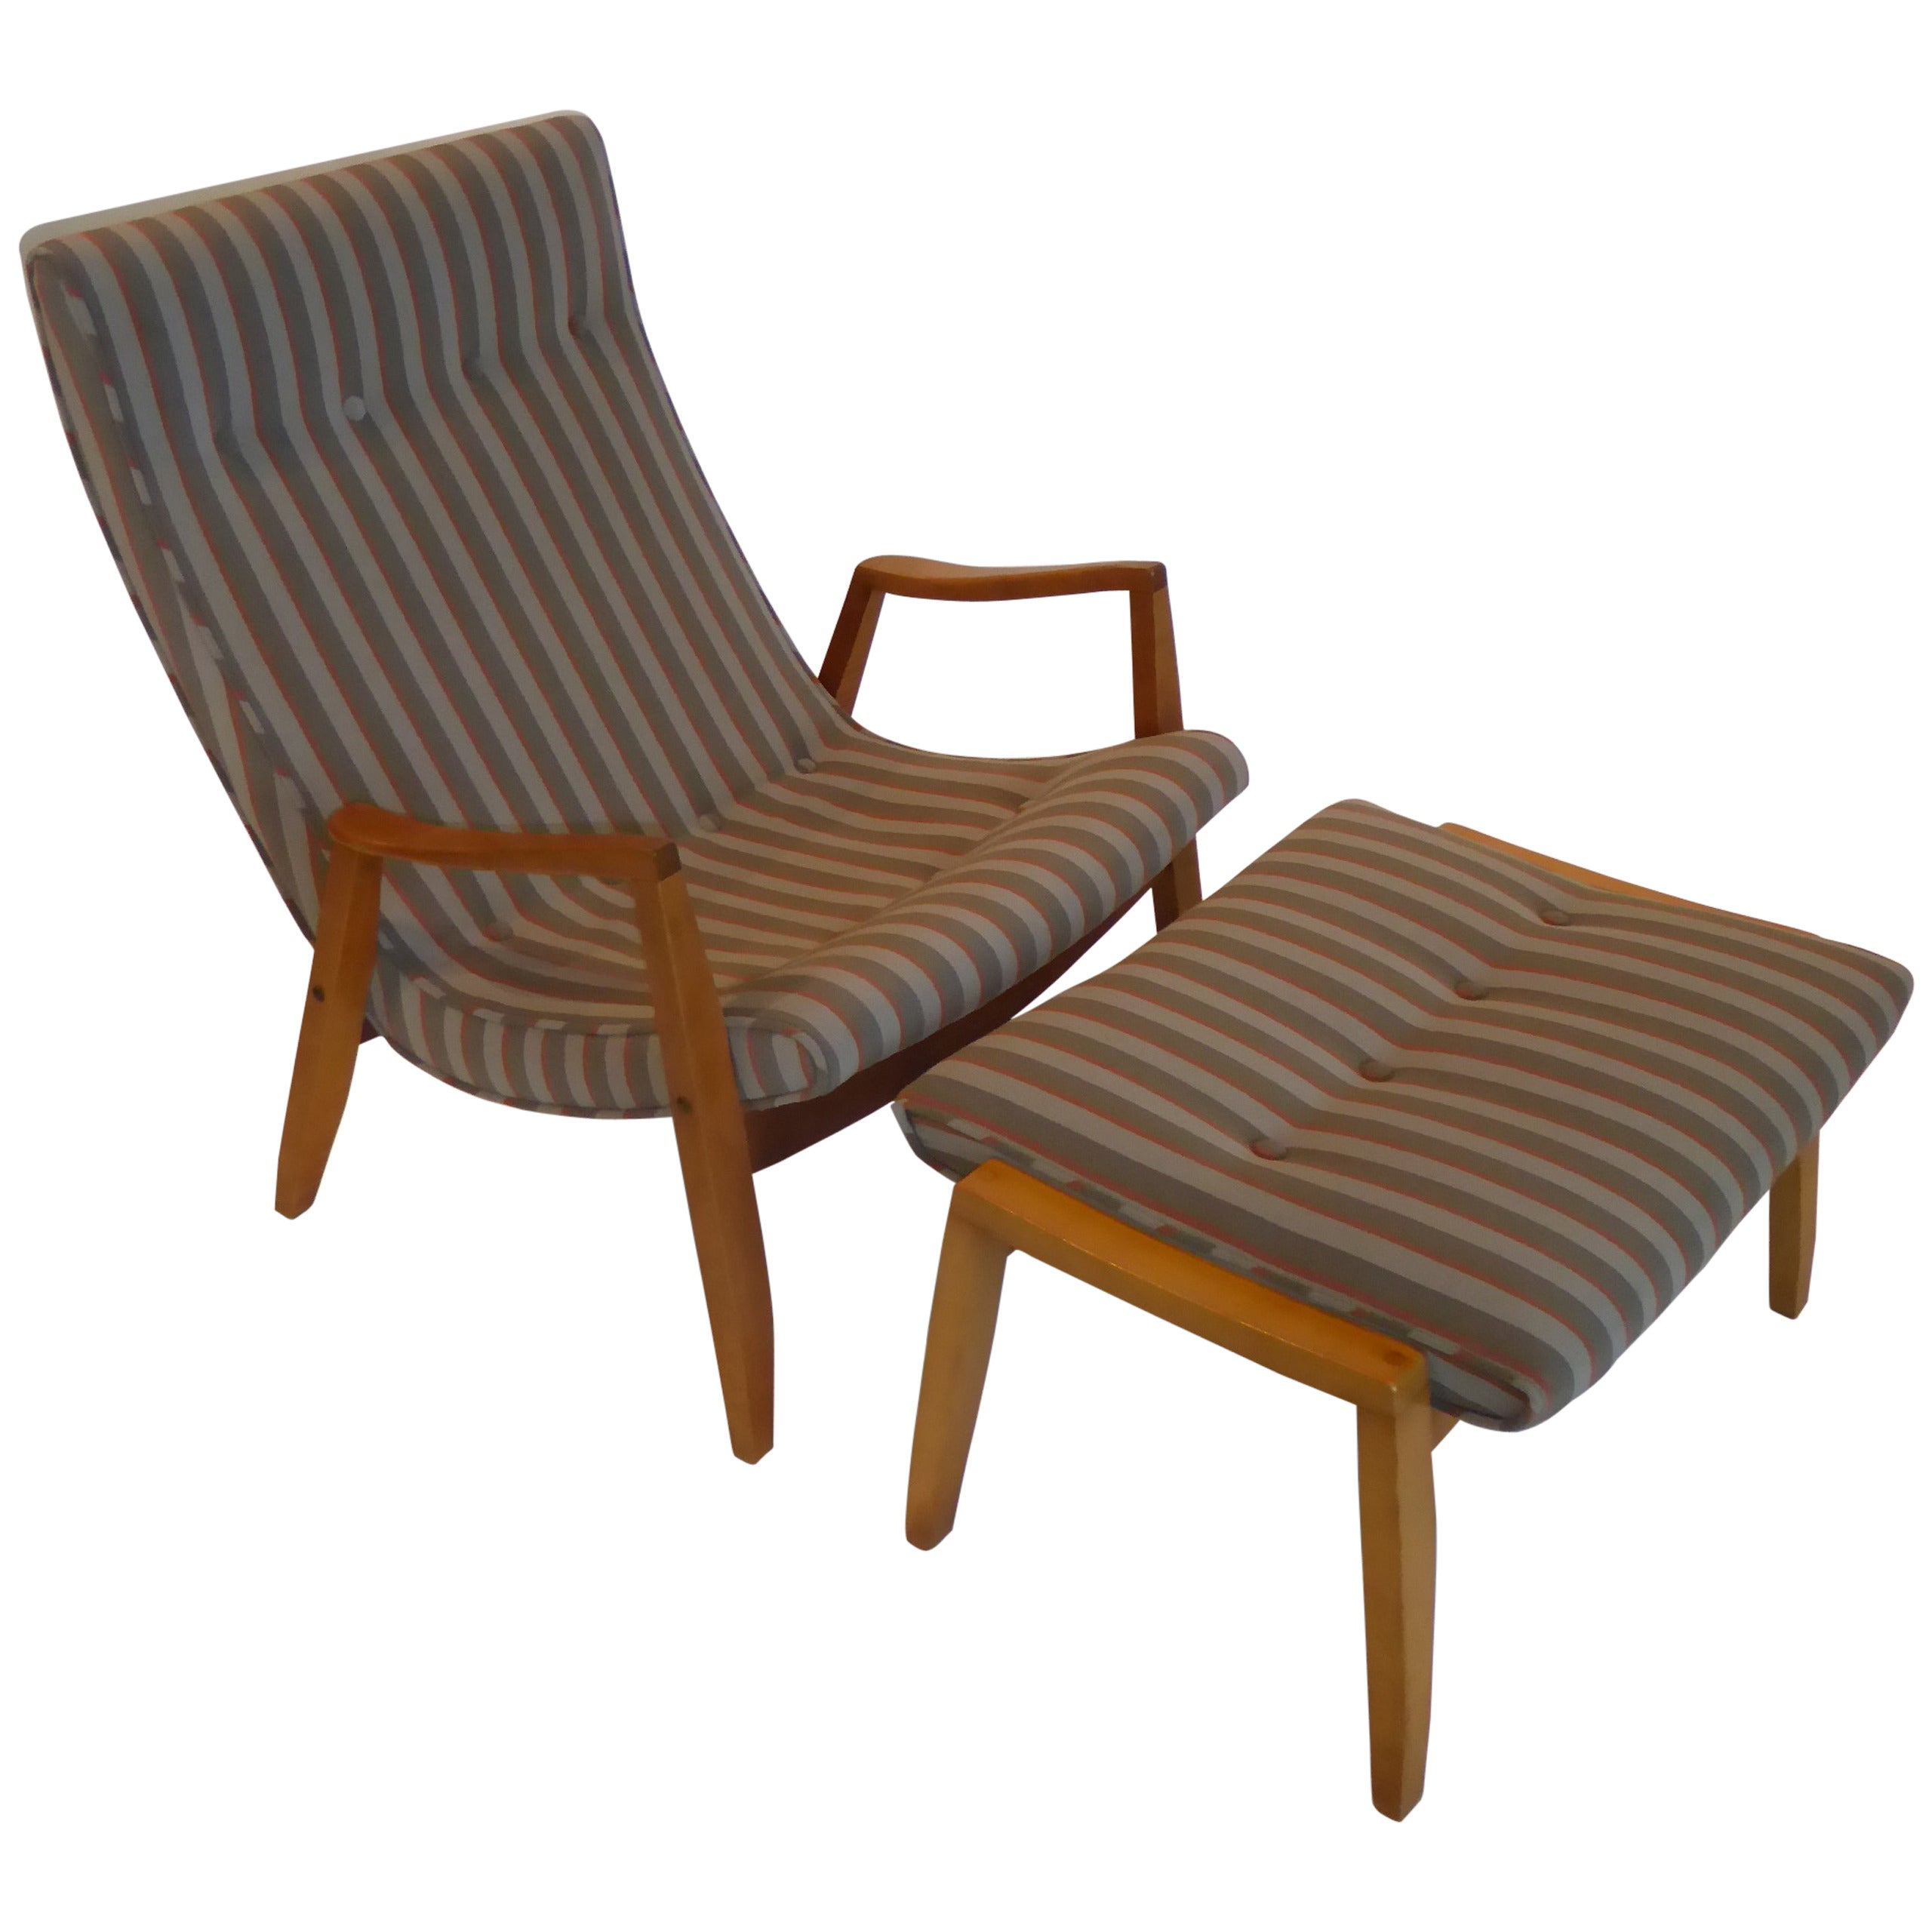 1950s Milo Baughman Scoop Lounge Chair and Ottoman